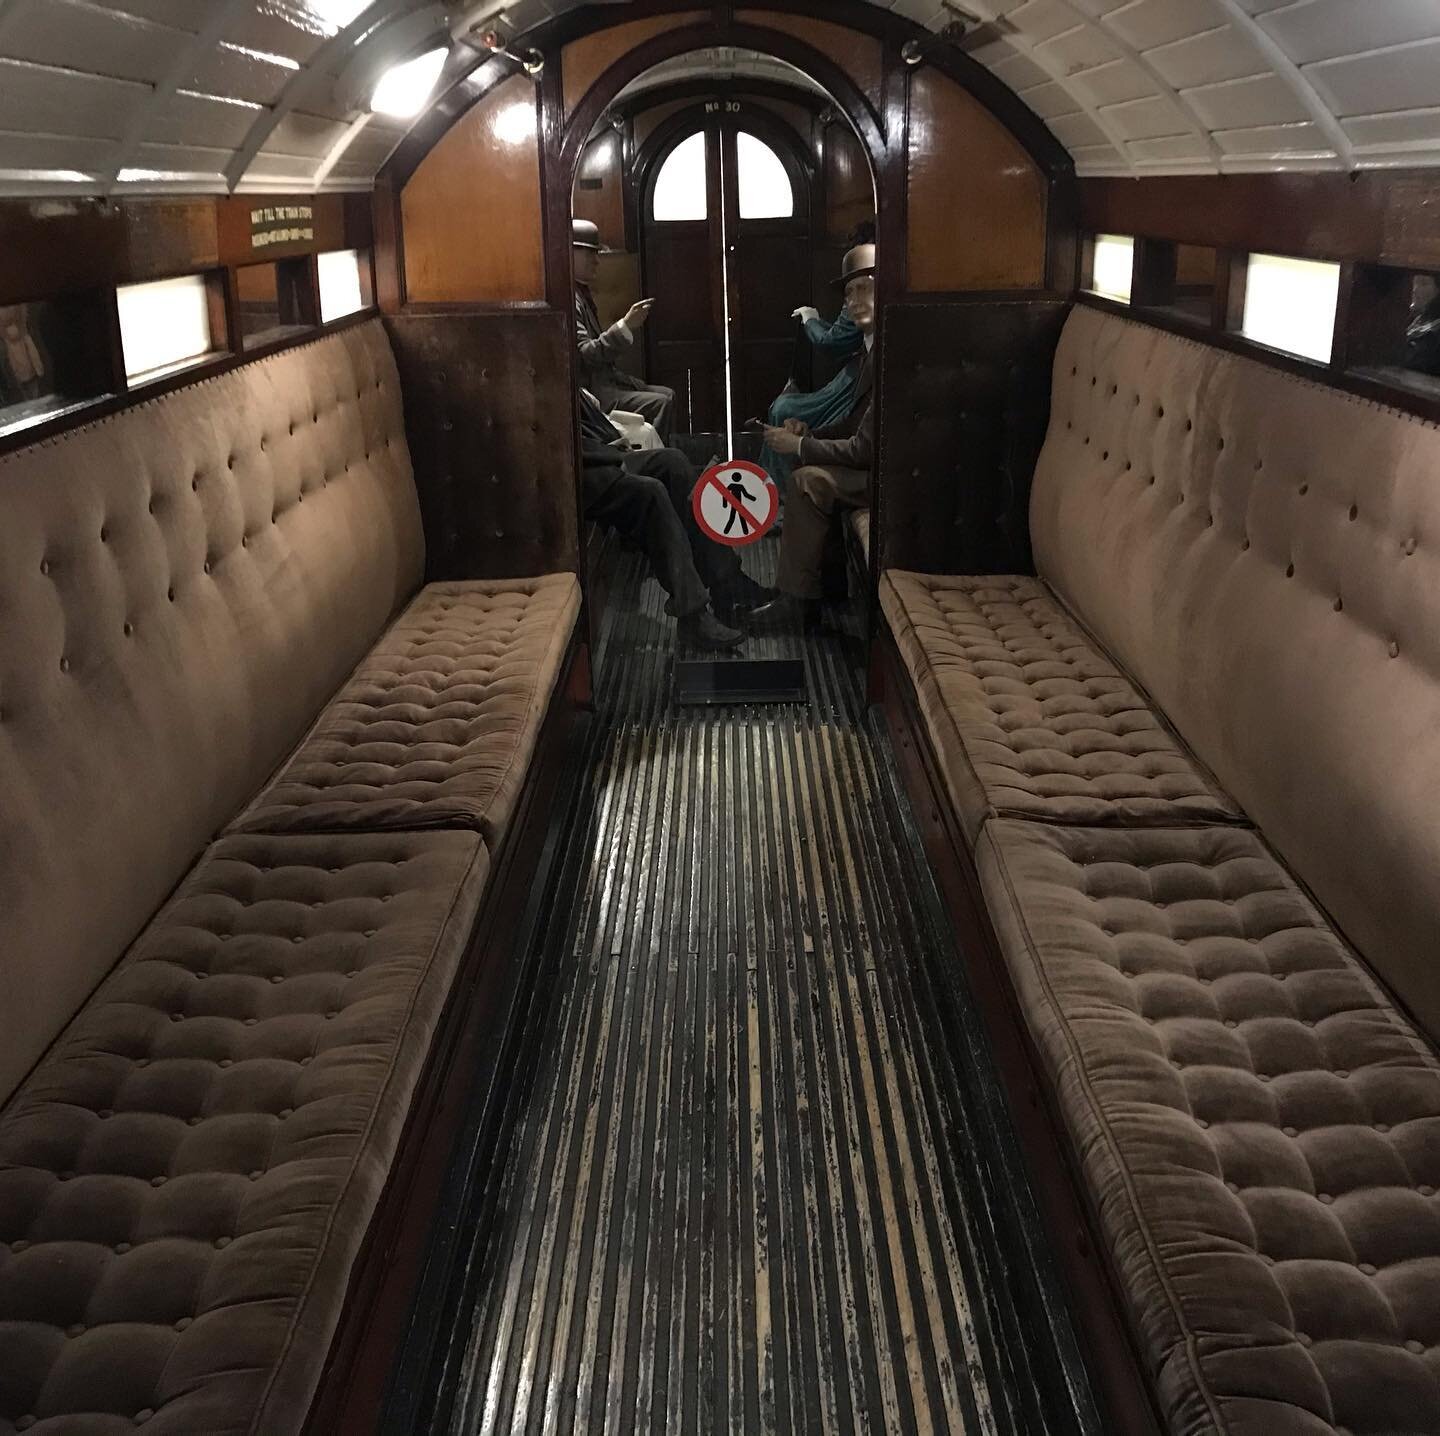 A couple of days on site at the  London Transport Museum in Covent Garden.
Repairs to the upholstery and re- covering the back panels on the &ldquo;padded cell &ldquo; carriage, the first electric underground train in service from 1890. @ltmuseum